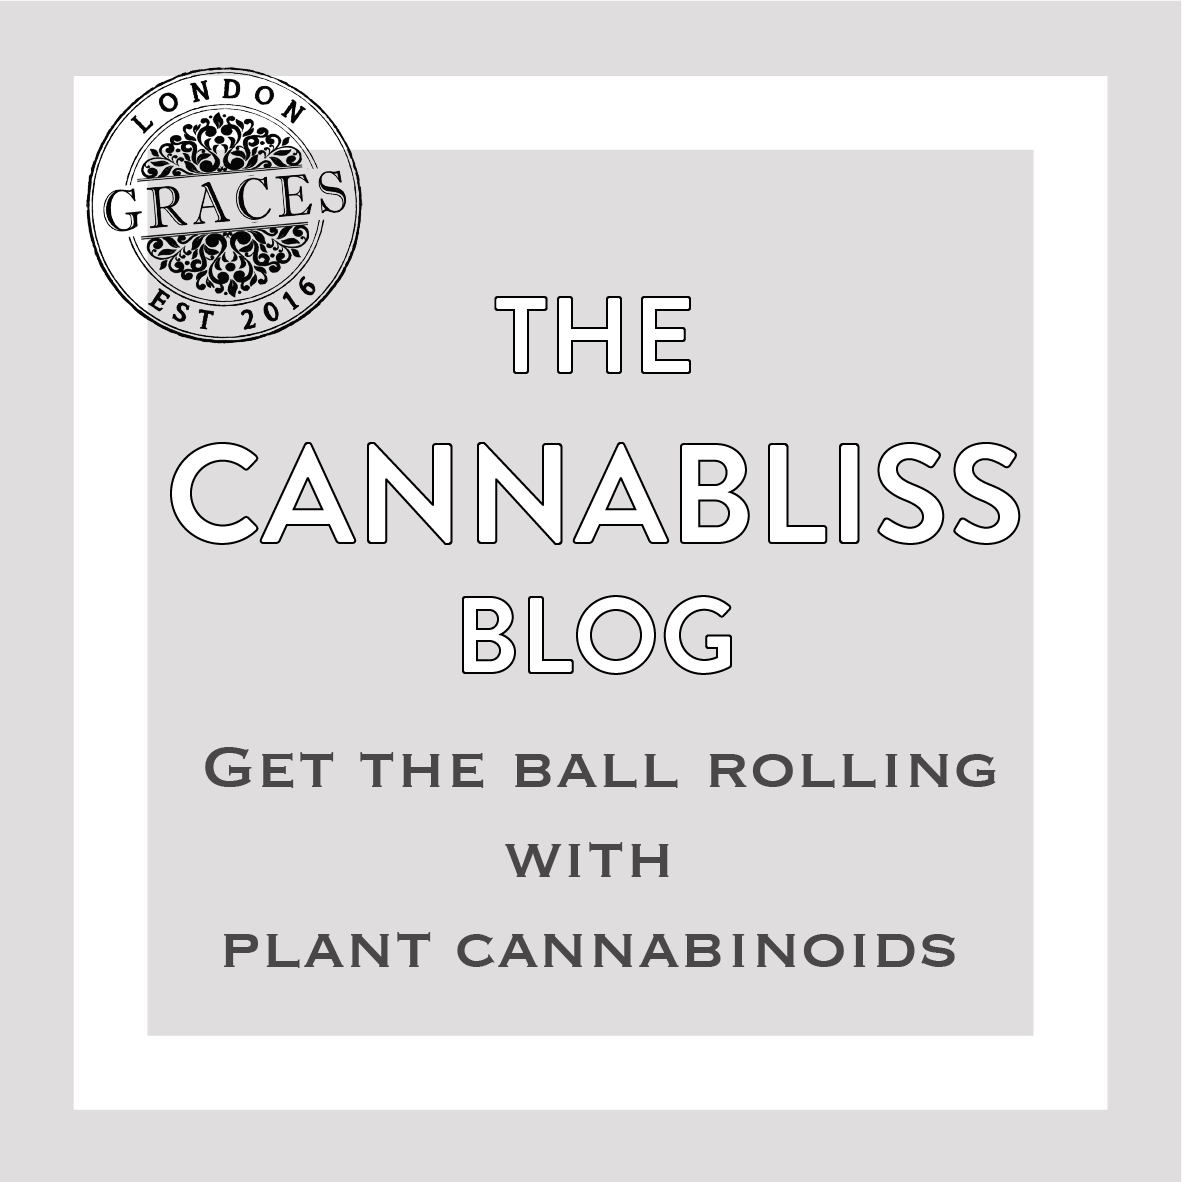 Cannabliss - Get the ball rolling with plant cannabinoids